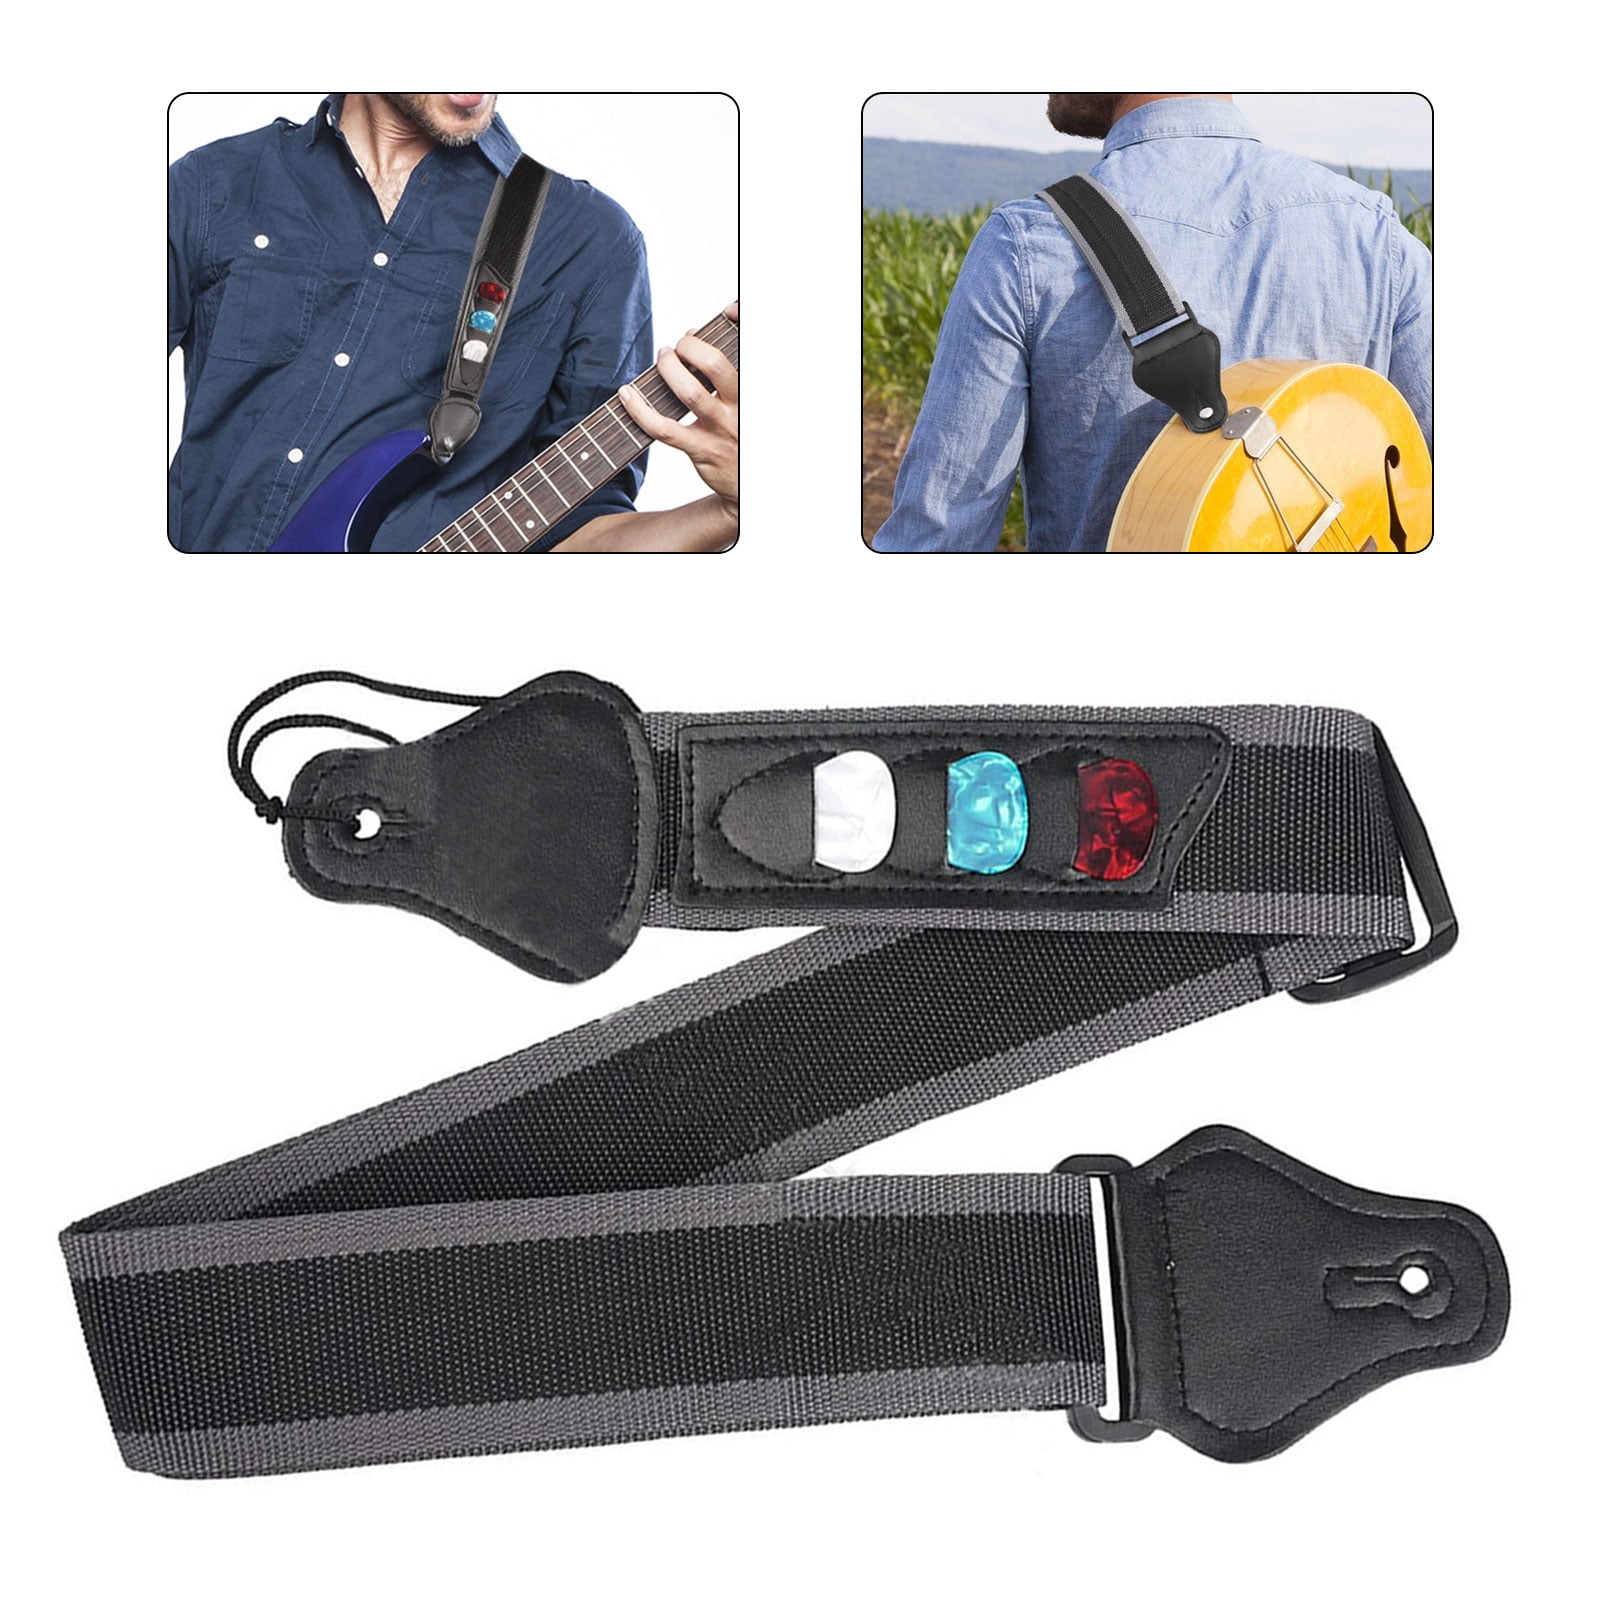 The BEST Guitar Straps for Your Bags Right Now